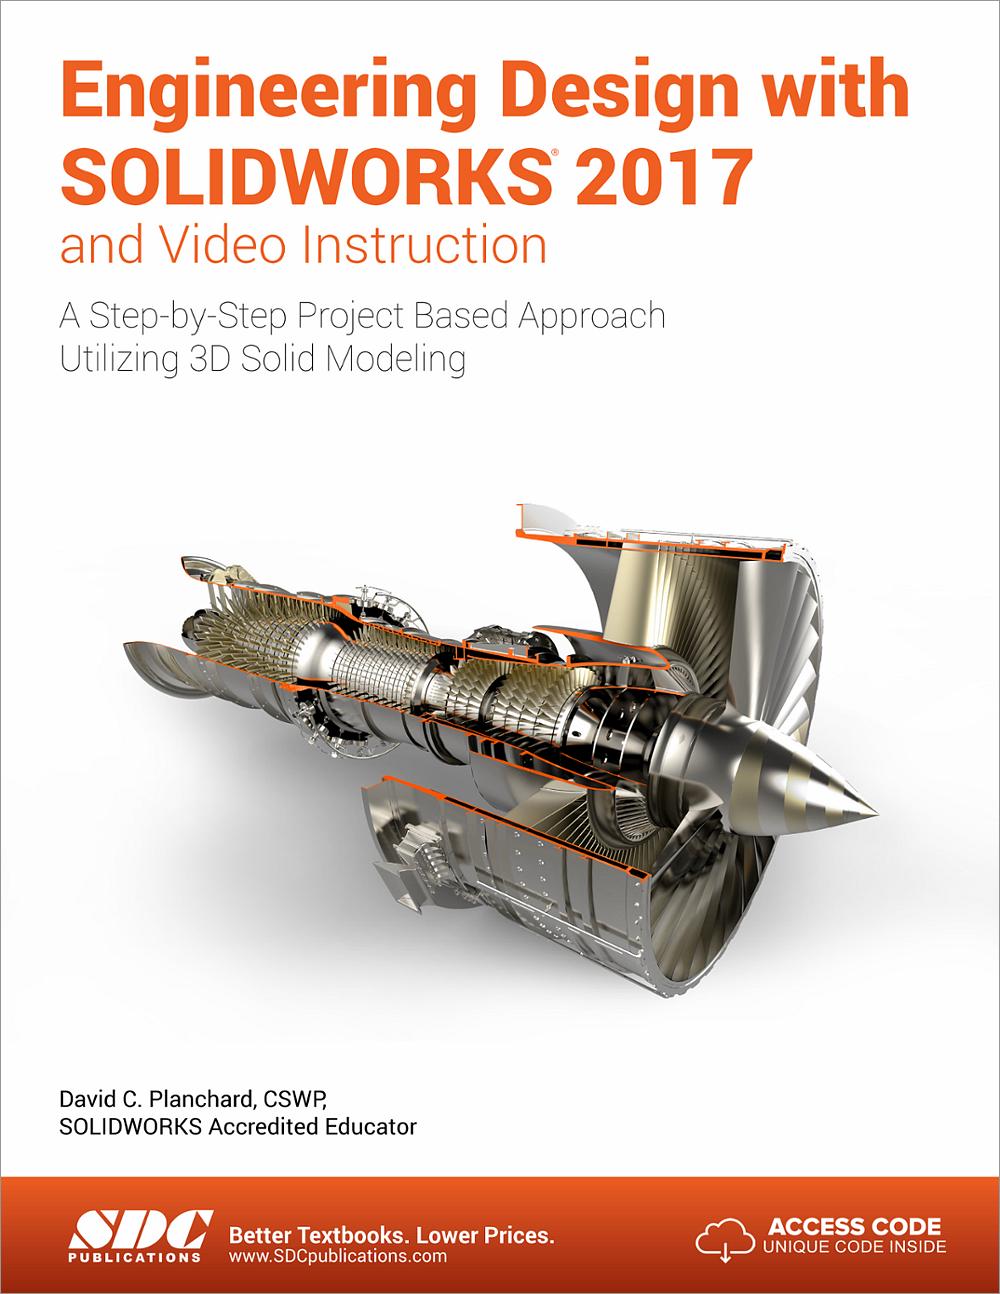 difference between solidworks 2017 and 2018